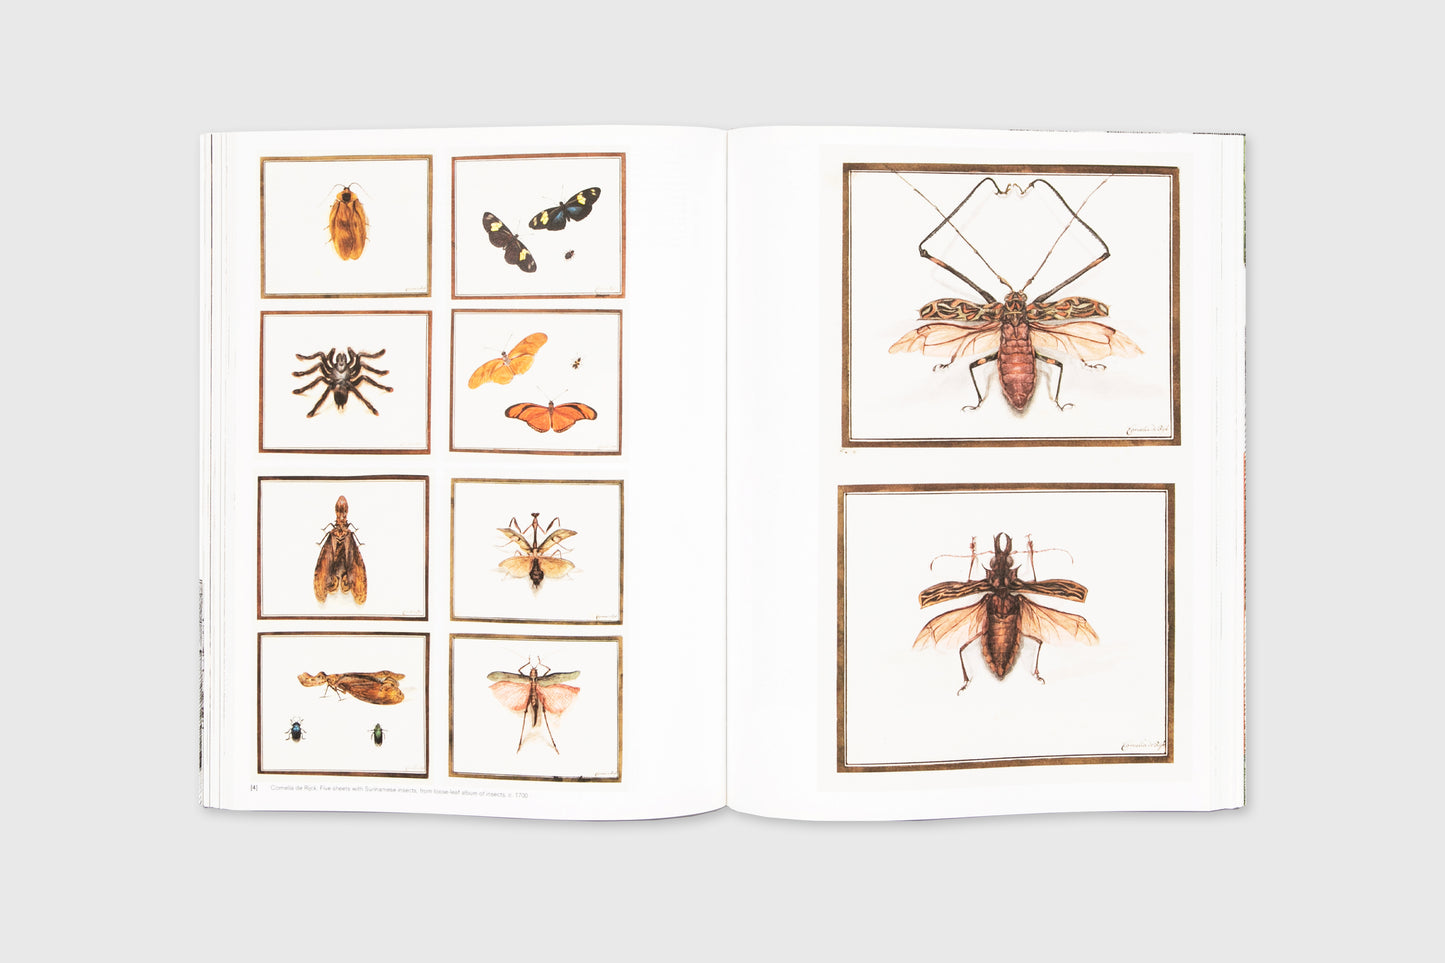 Crawly Creatures: Depiction and Appreciation of Insects and other Critters in Art and Science